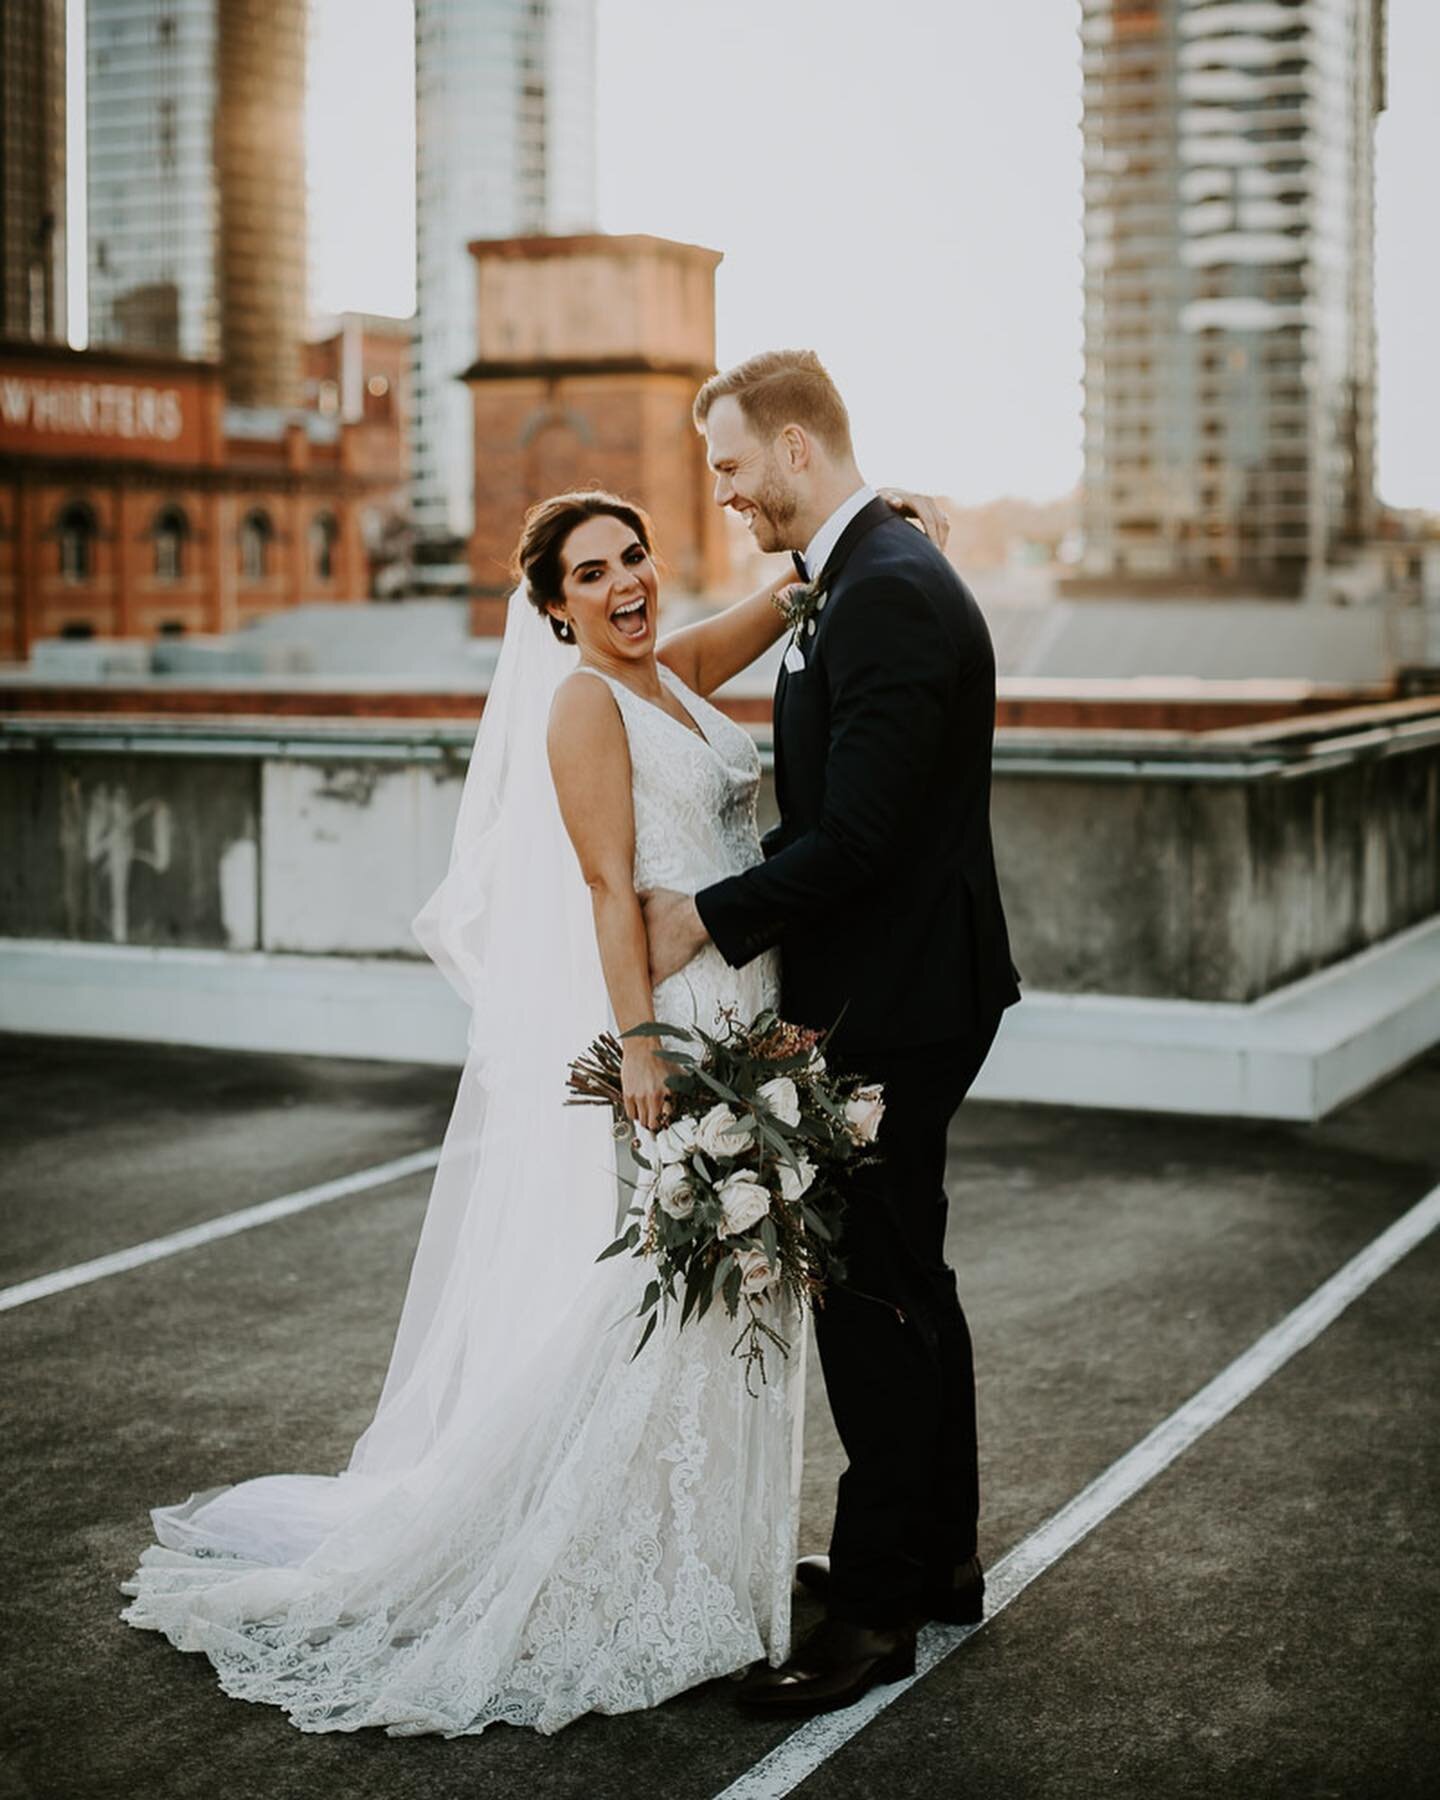 ~ Jenny &amp; Matt ~ 
To the rooftops to chase that elusive golden hour light in the city ☀️

@howardsmithwharves @aperfectlypackagedparty @ginelledale @luvbridal